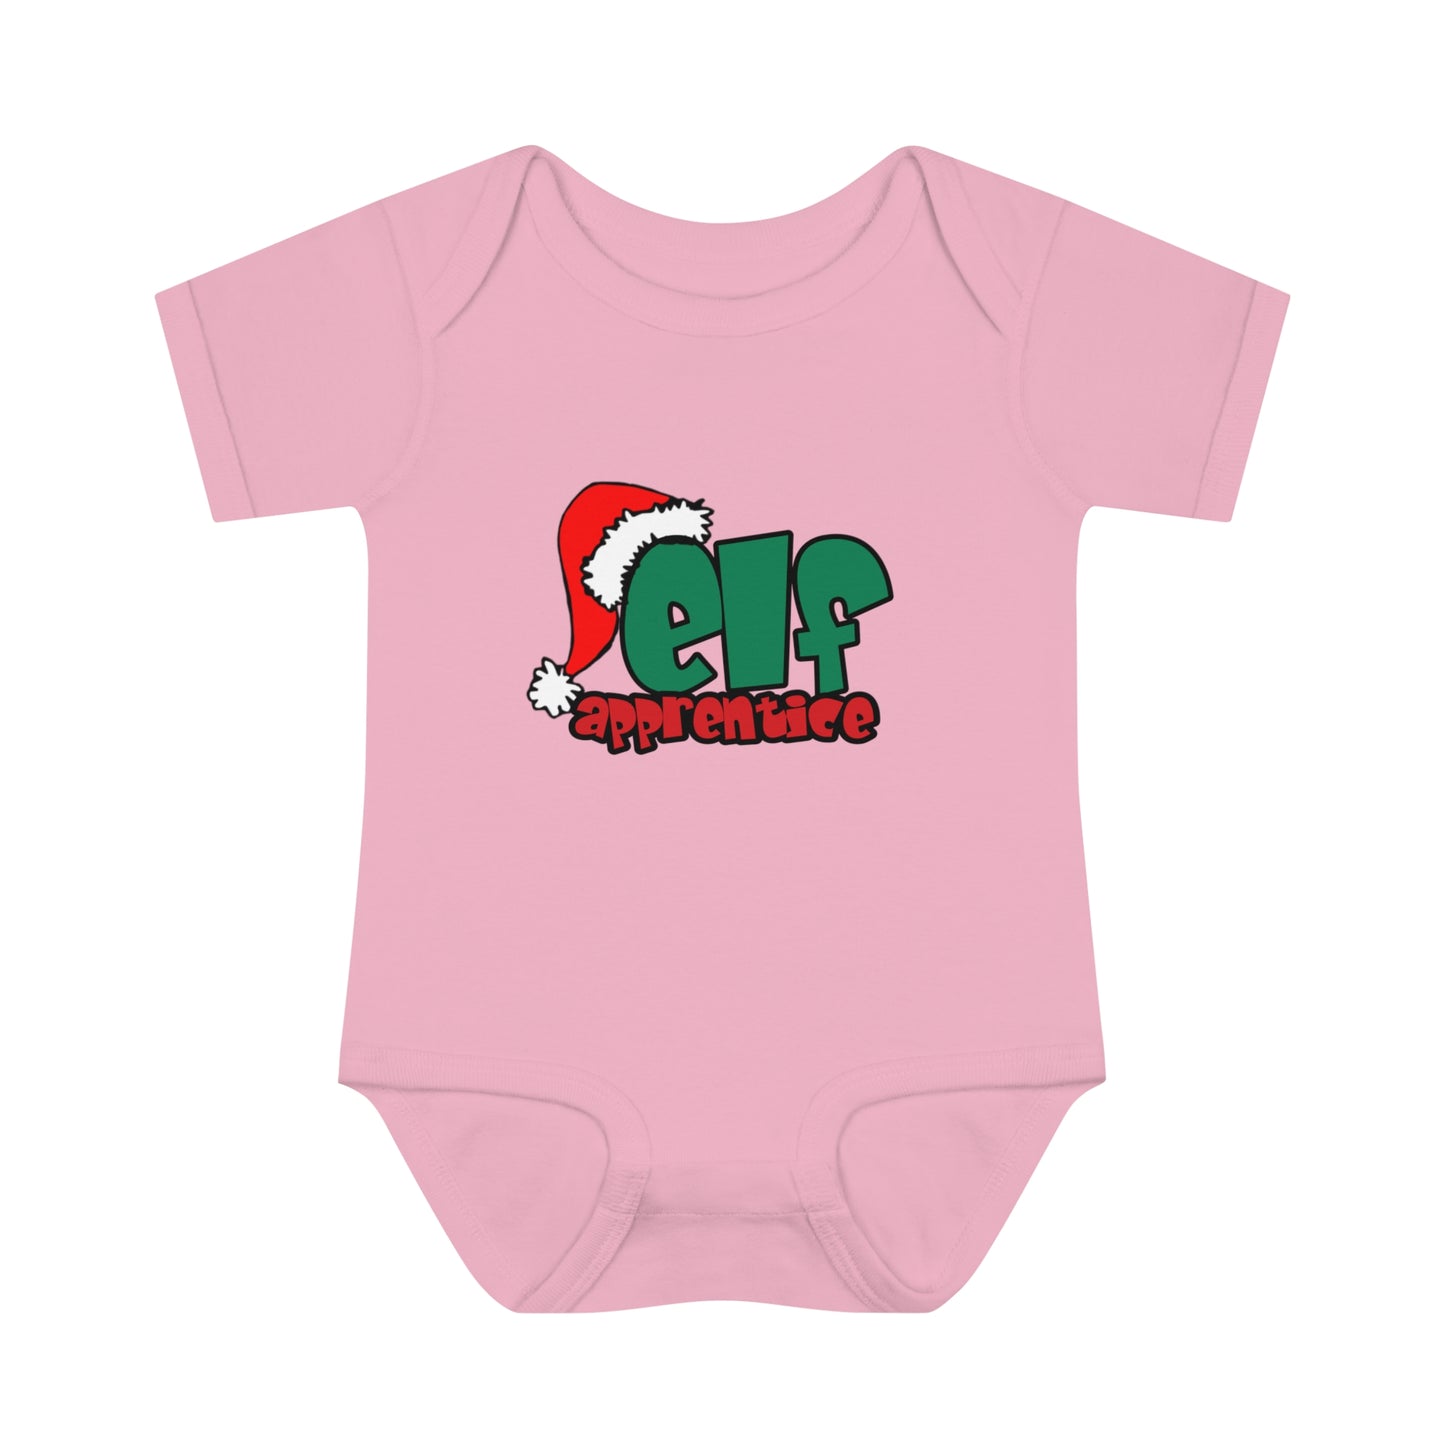 Elf Apprentice,  Cute Baby One Piece Body Suit, Christmas t-shirt, Infant gift, Red and green, Santa Hat, Adorable Soft, Shower Gift